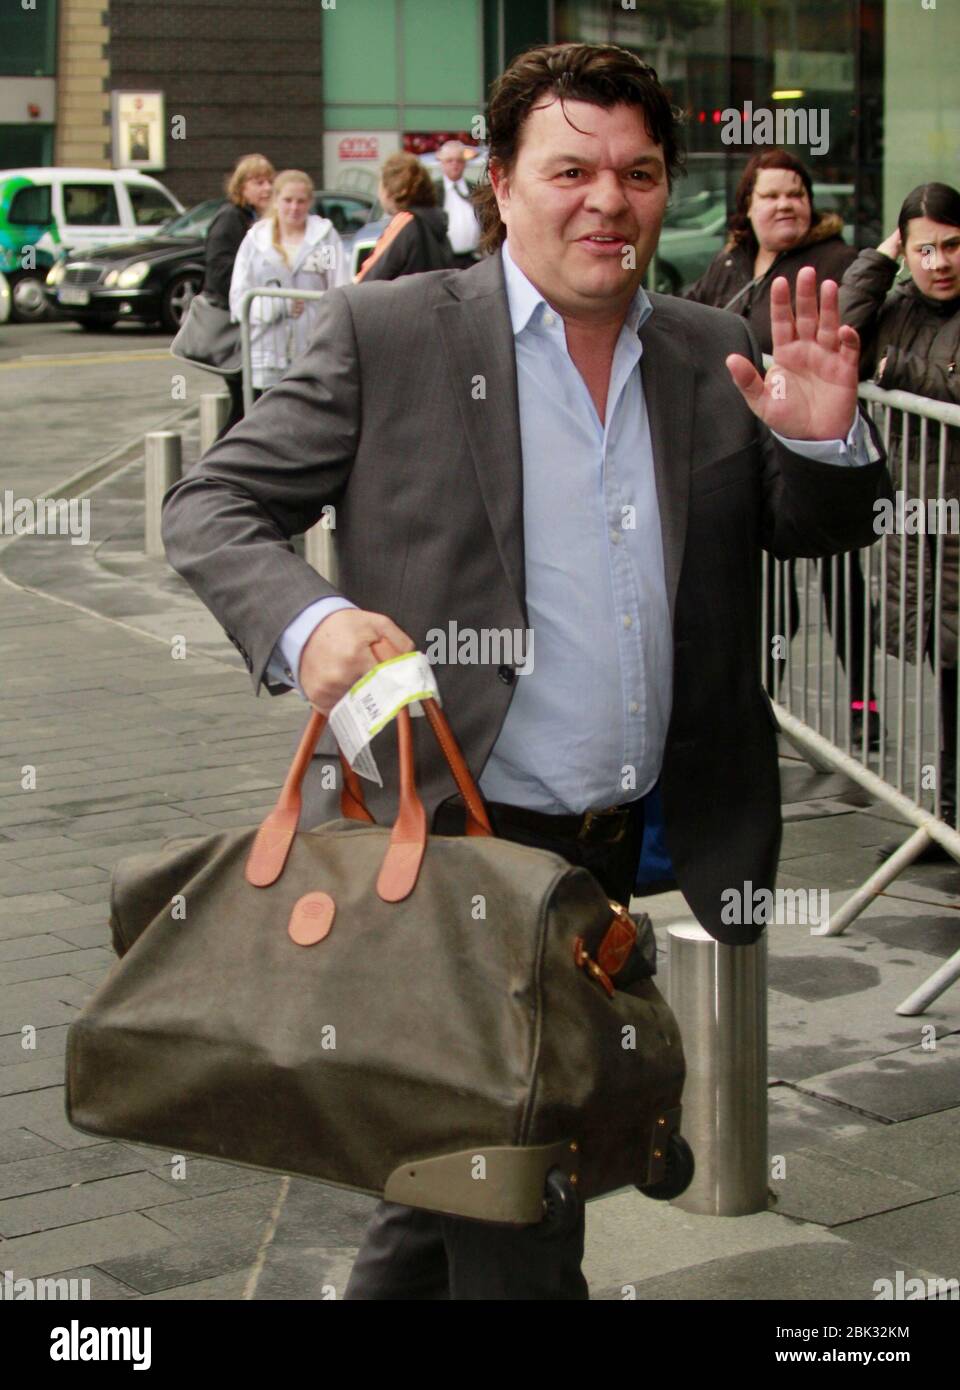 Celebrities out and about credit Ian Fairbrother/Alamy Stock Photos Stock Photo